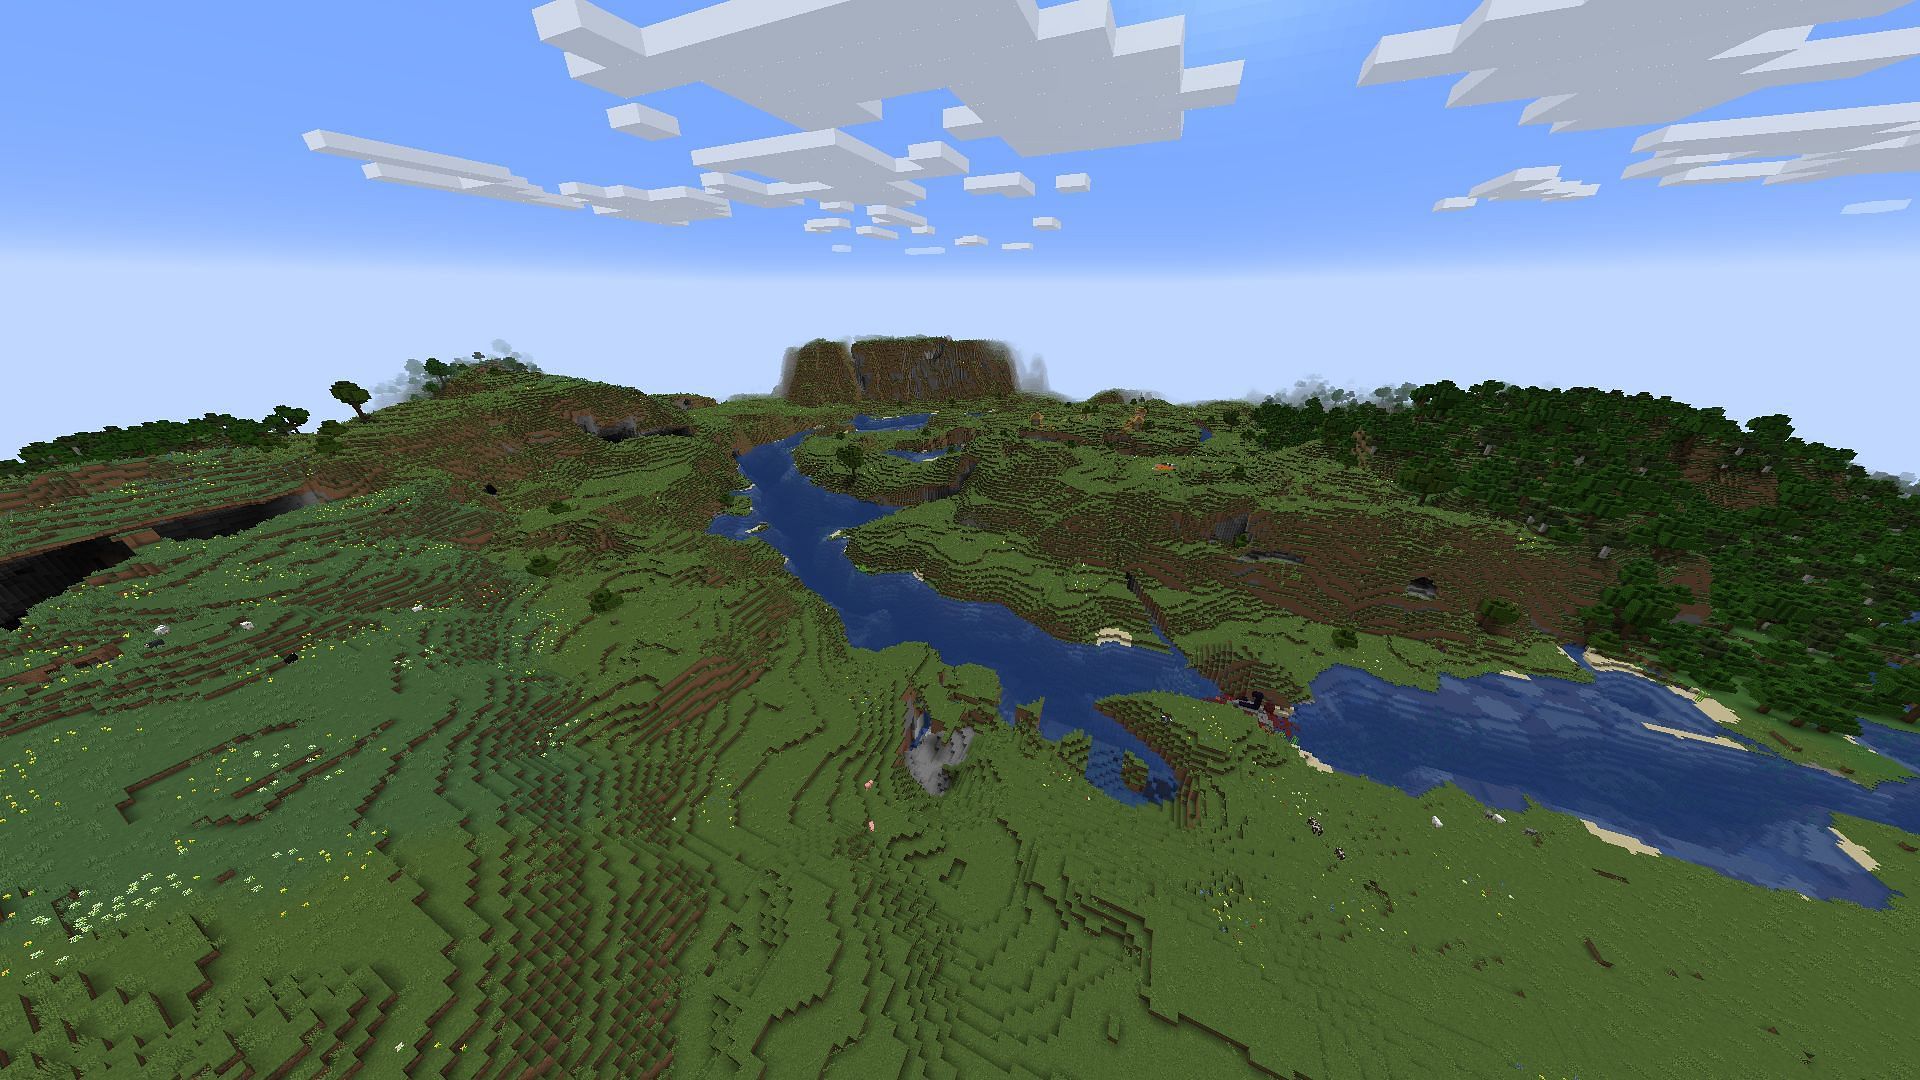 Why exploring an entire Minecraft world is impossible